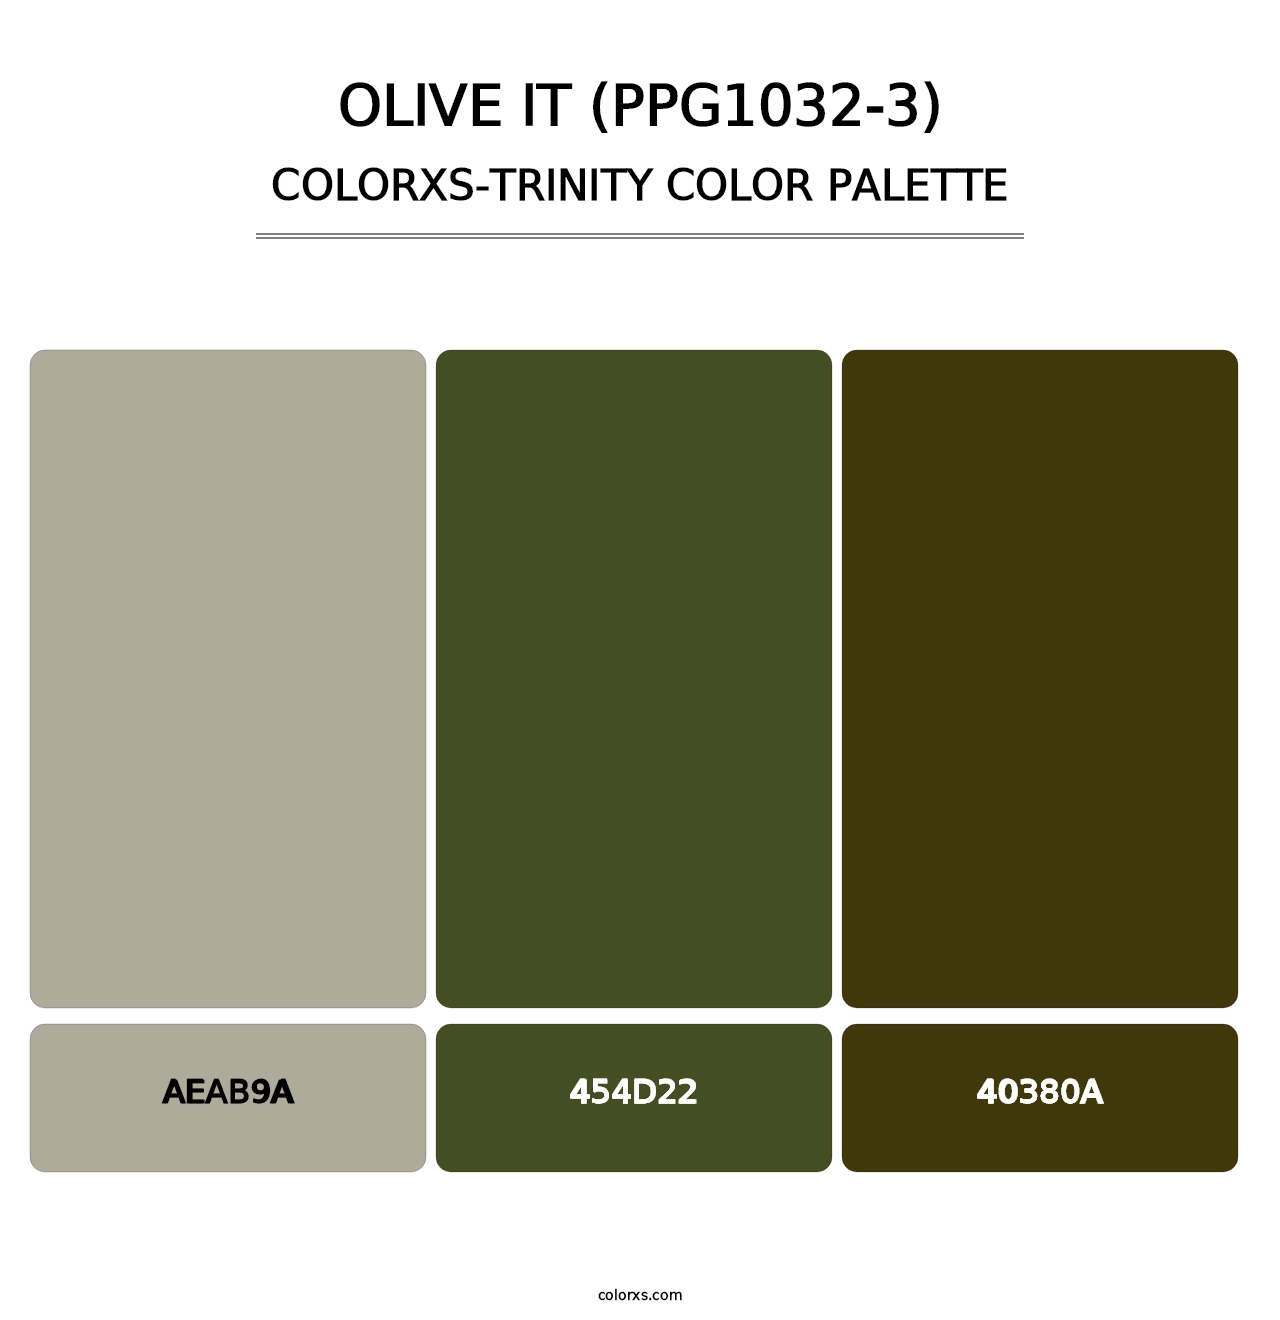 Olive It (PPG1032-3) - Colorxs Trinity Palette